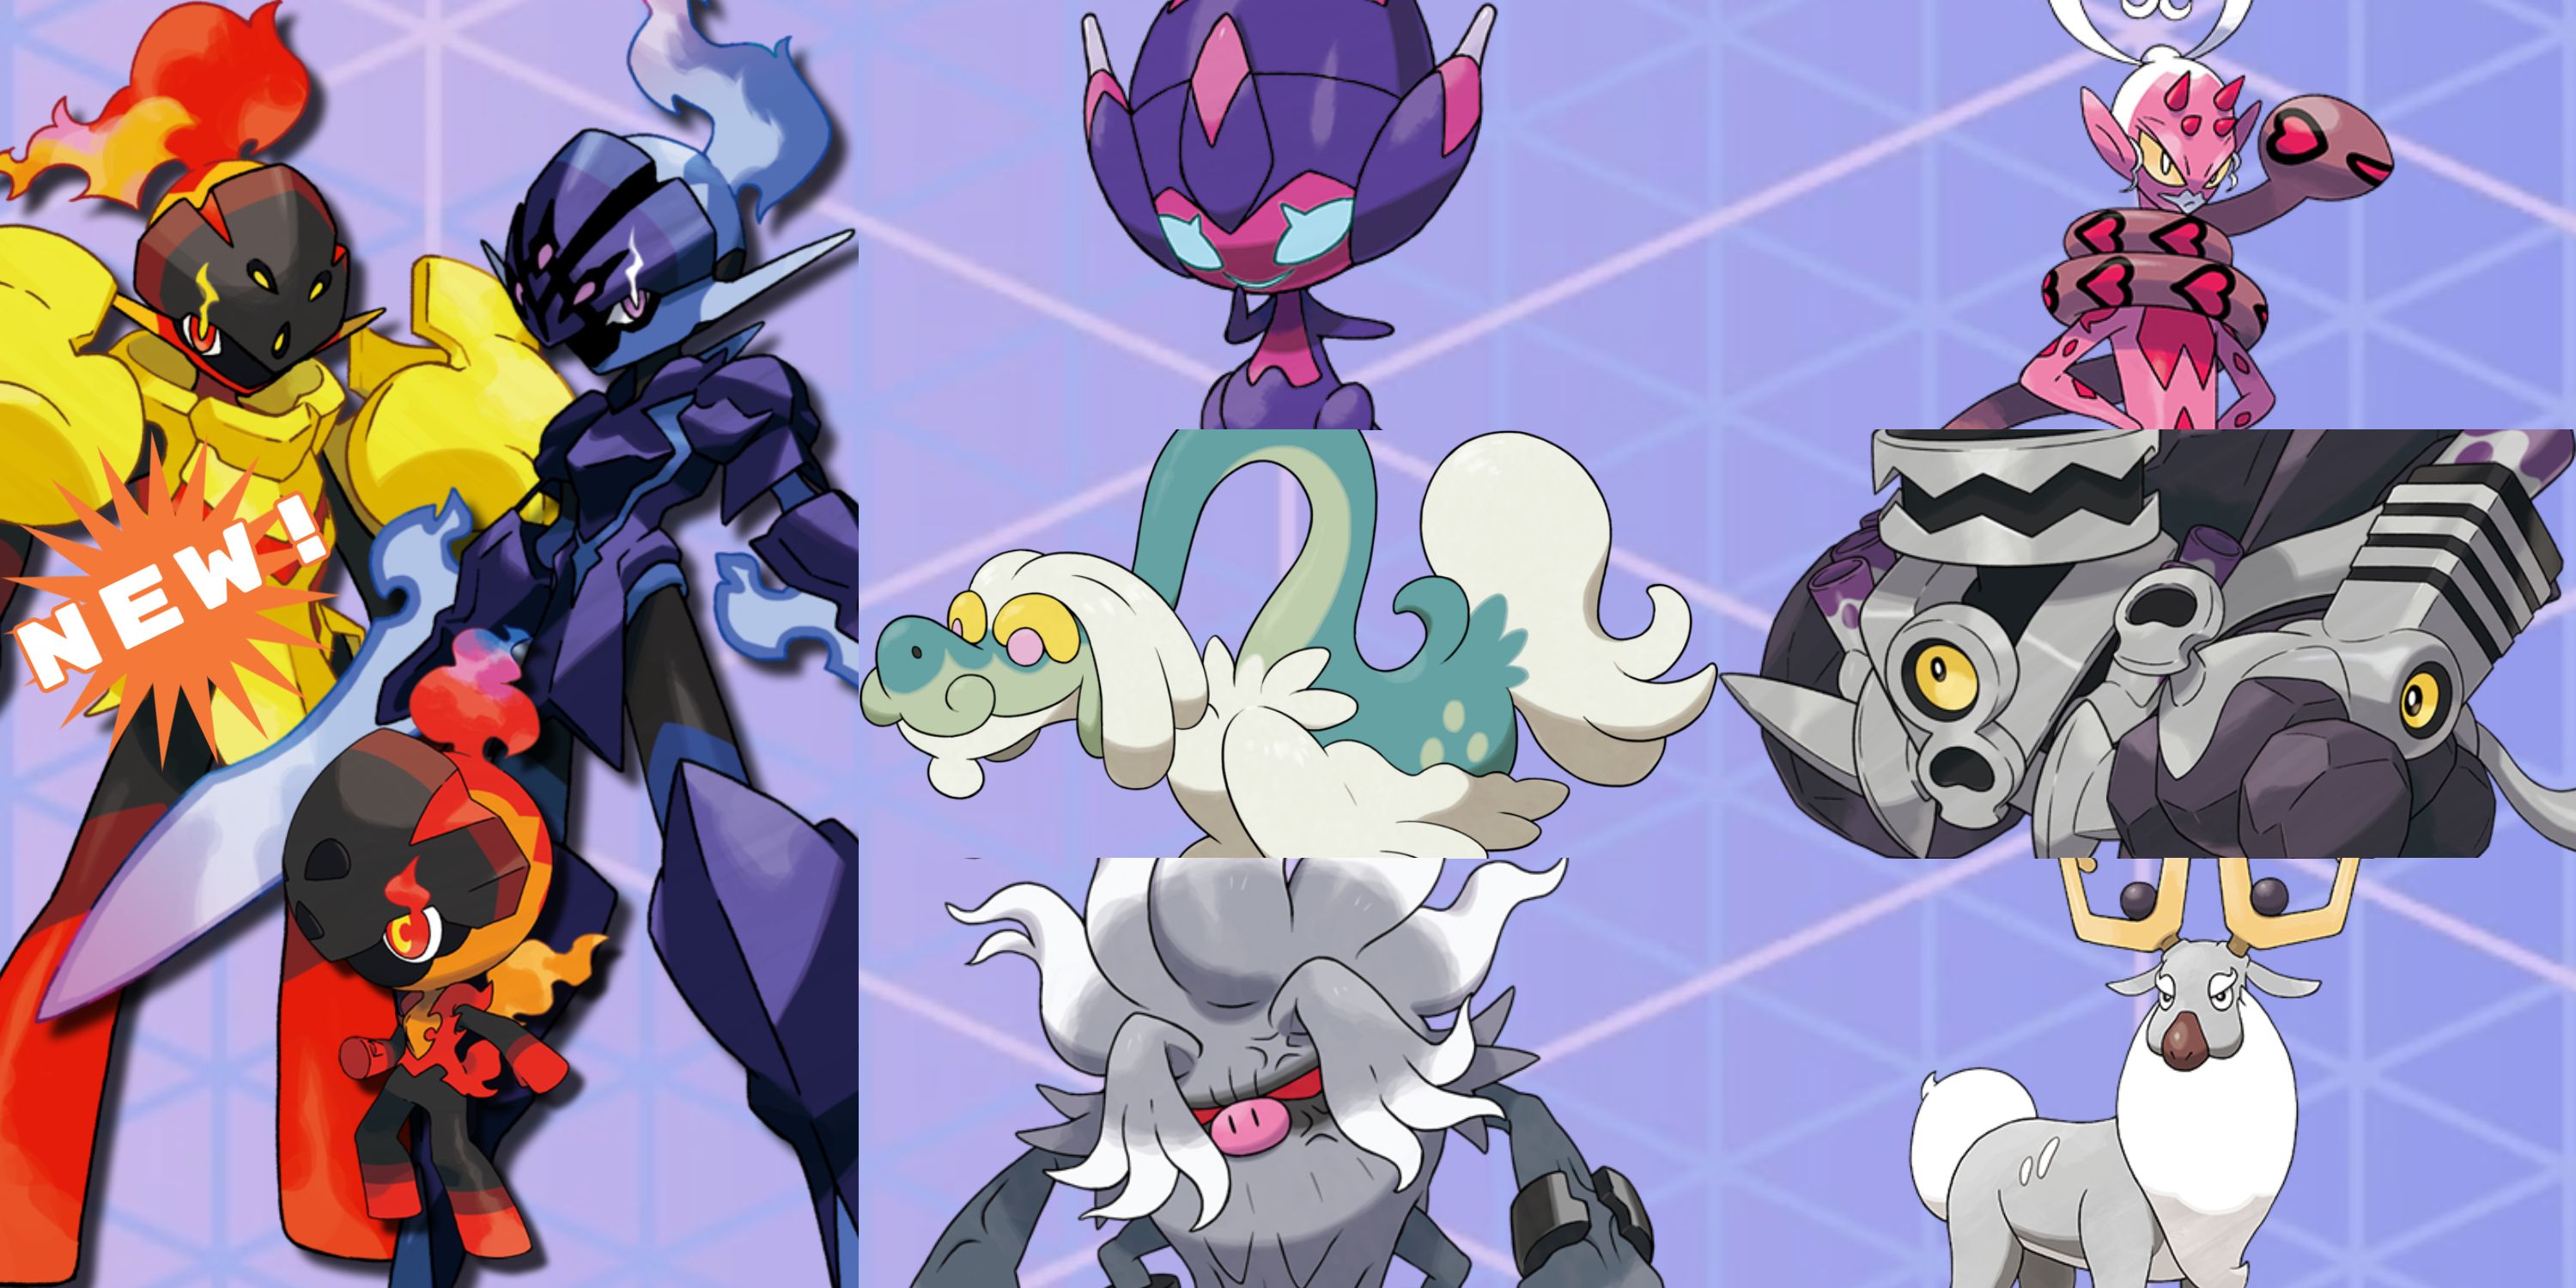 an image collage of the most recently added pokemon in pokemon go, with ceruledge, armarouge, and charcadet being the newest and the most prominently displayed